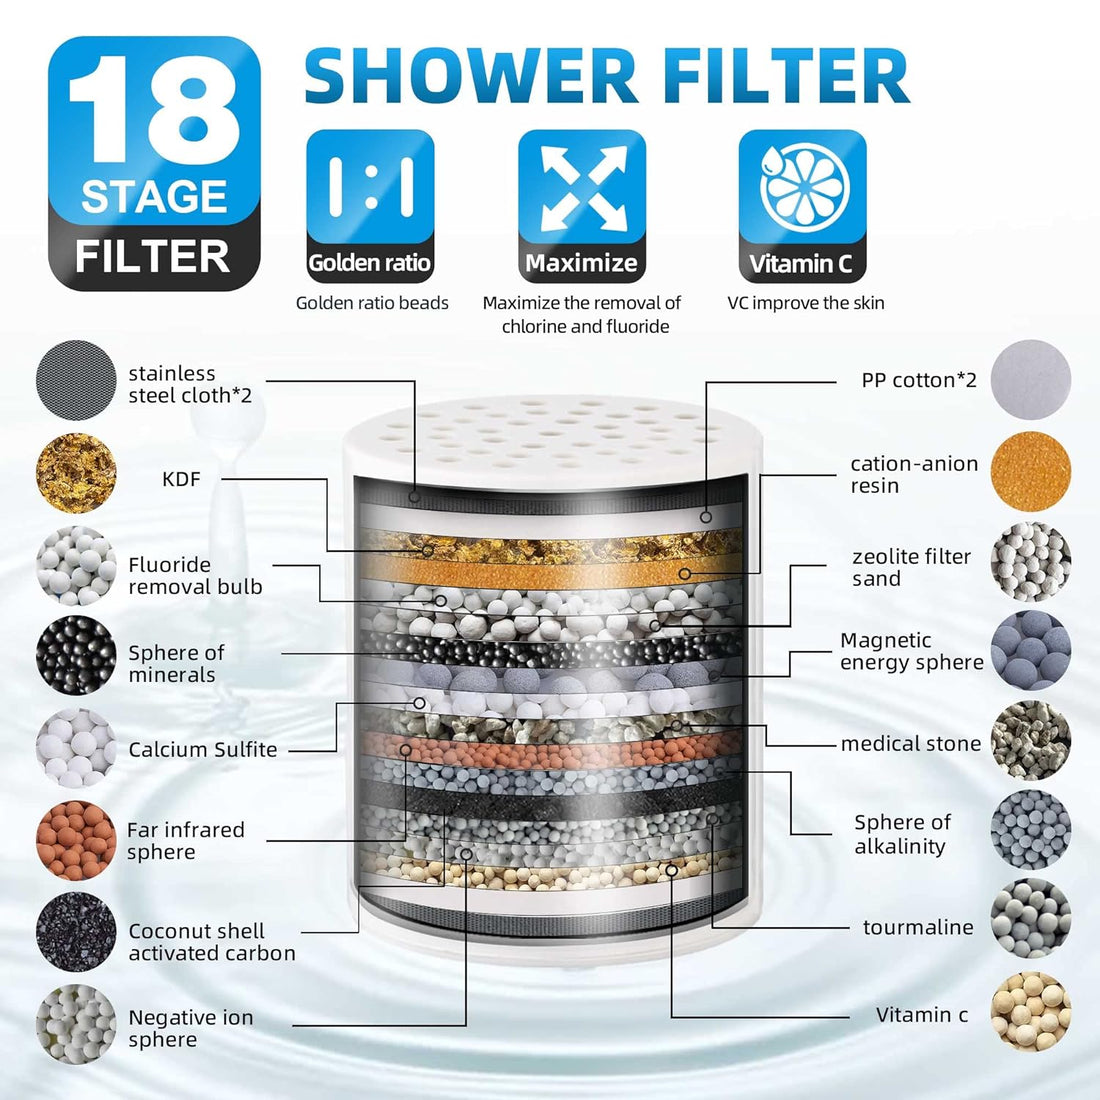 3 pcs Replacement Cartridge 18 Stage Shower Head Filter Clean Softener Remove Chlorine and Fluoride with Vitamin C Quickly 3-6 Months And Harmful Substances Form Hard Water